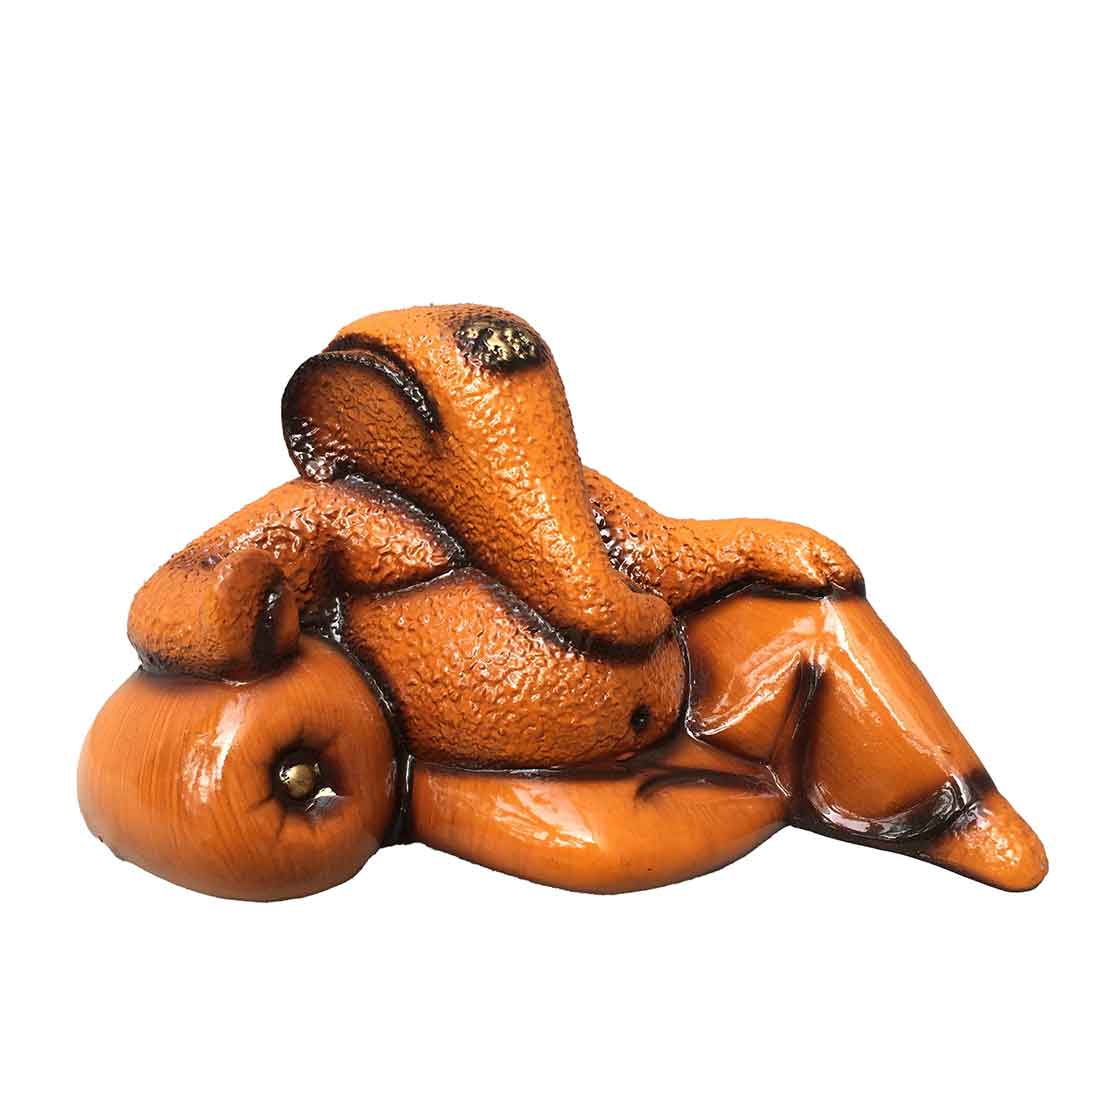 Ganapathi Statue | Ganesh Murti in Sitting Pose - For Home, Office & Gifts - 6 Inch - ApkaMart